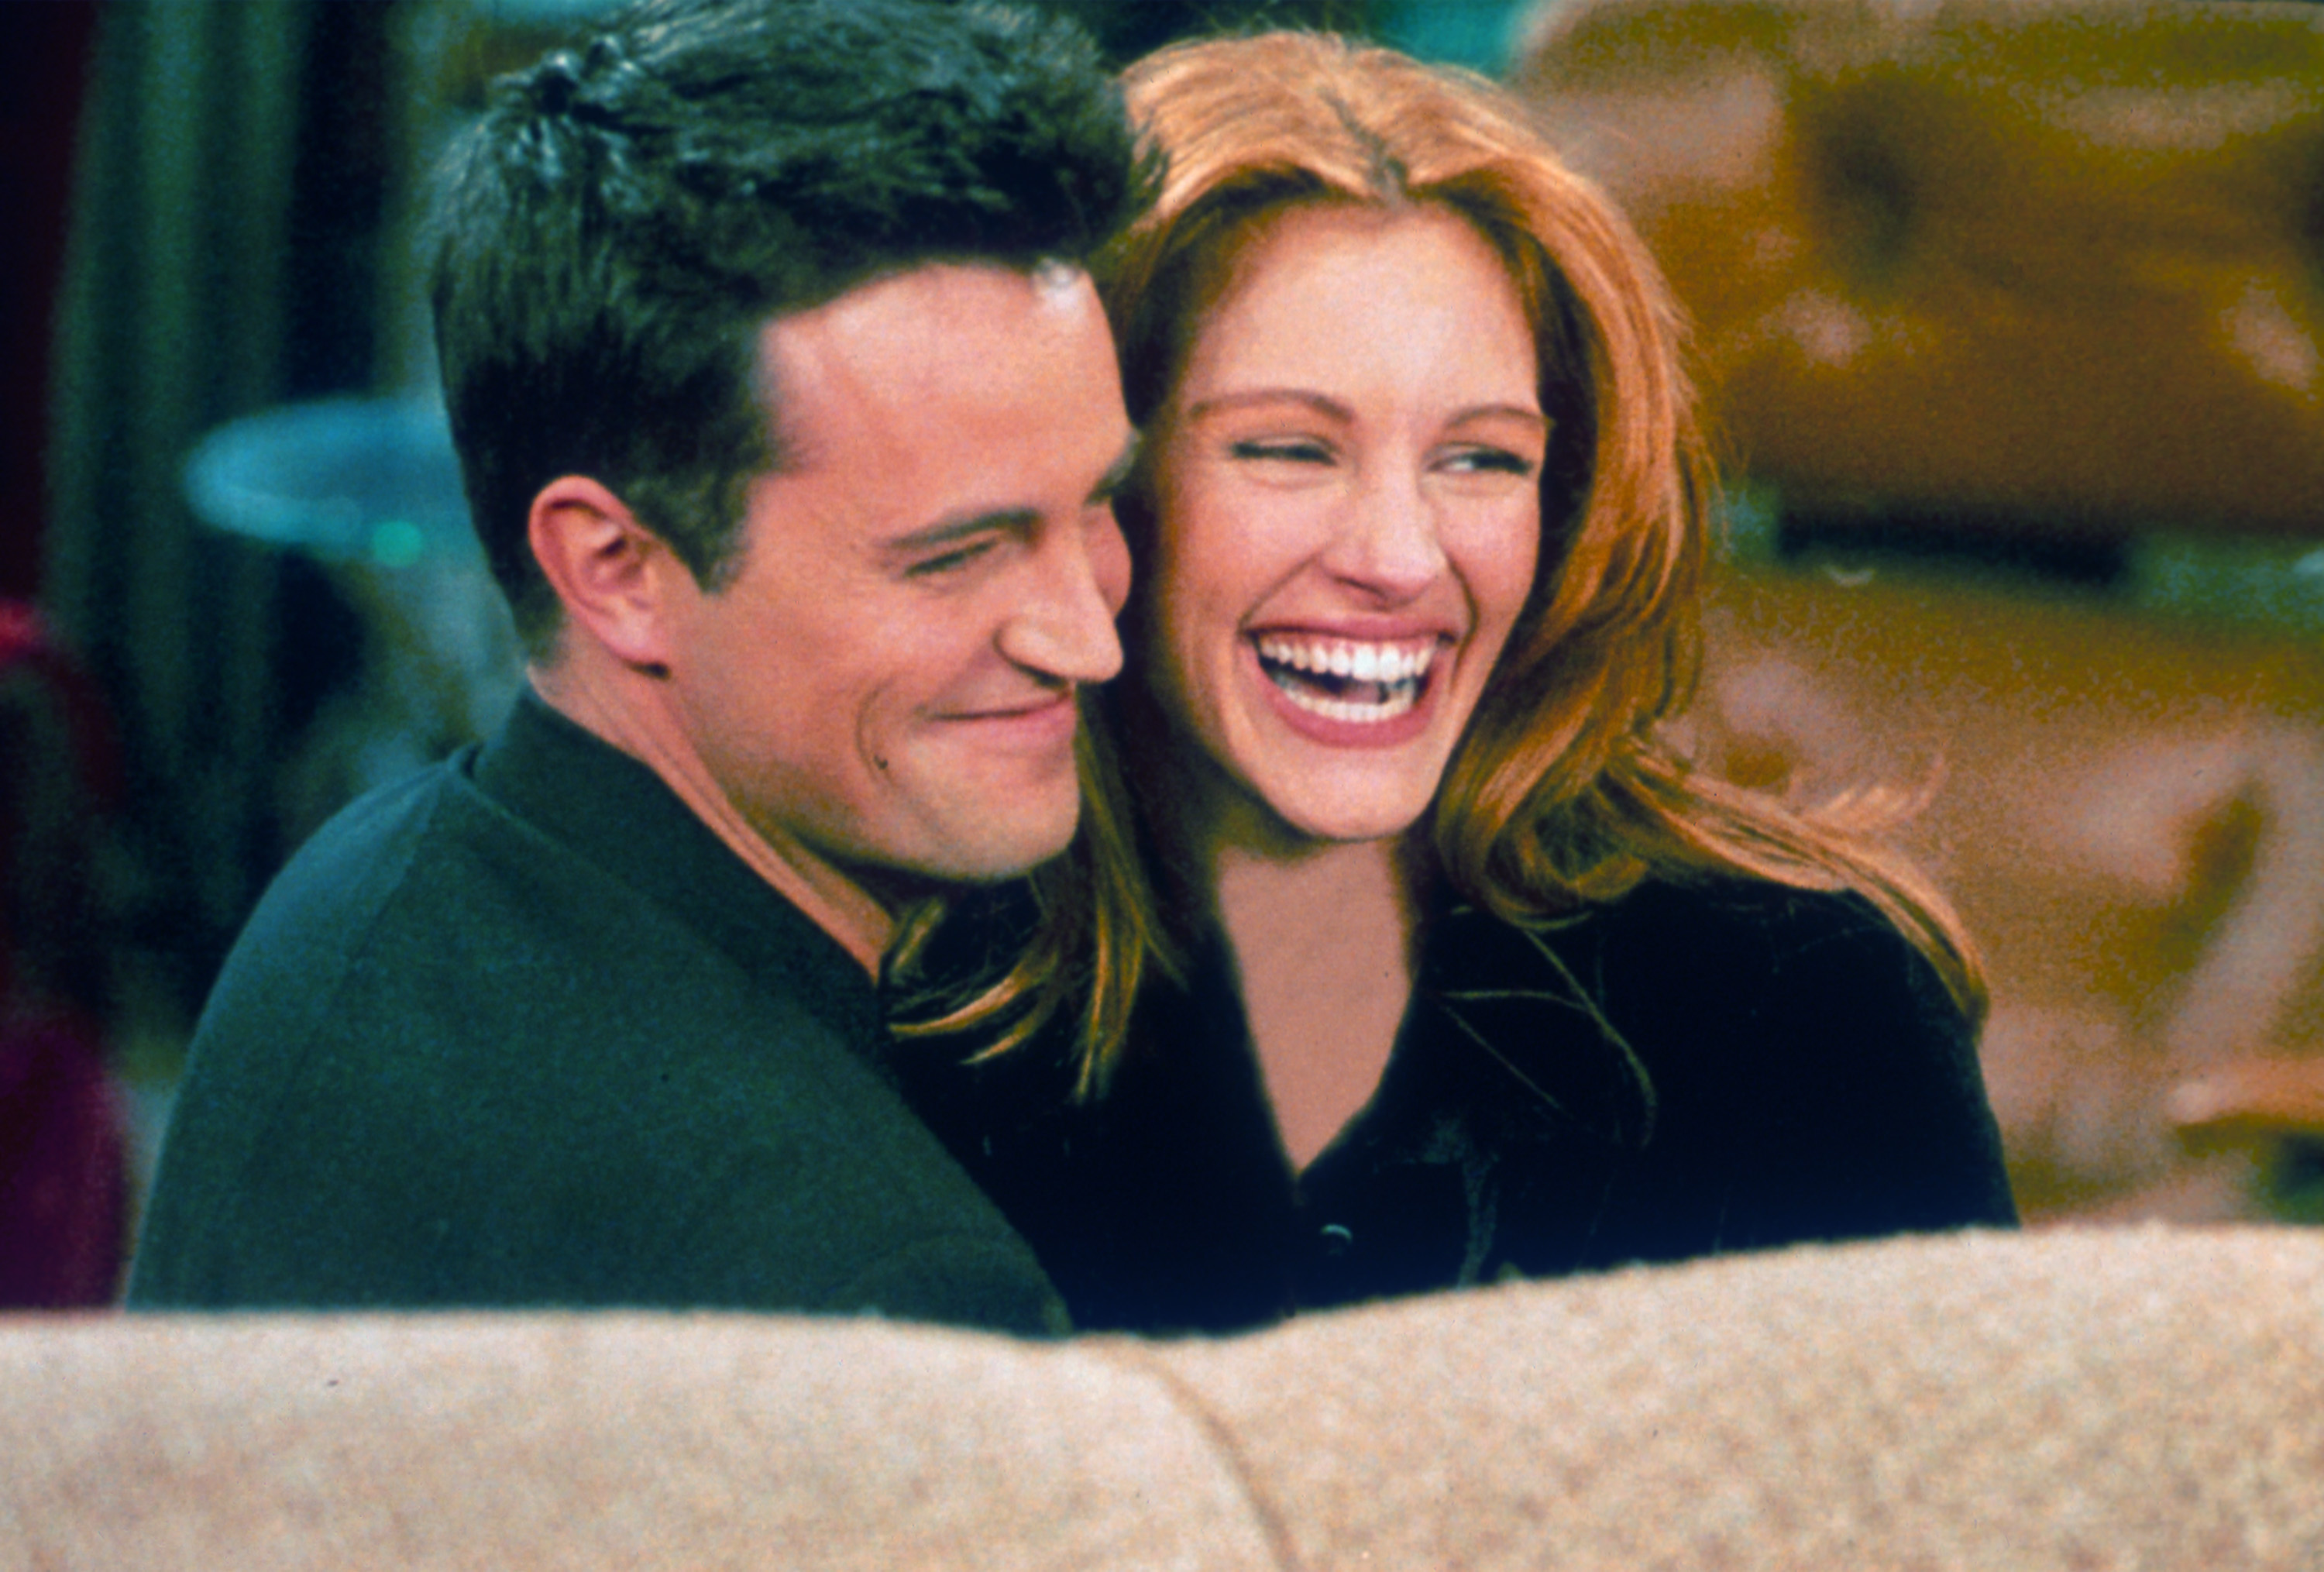 Matthew Perry and Julia Roberts on the set of "Friends," in 2000 | Source: Getty Images